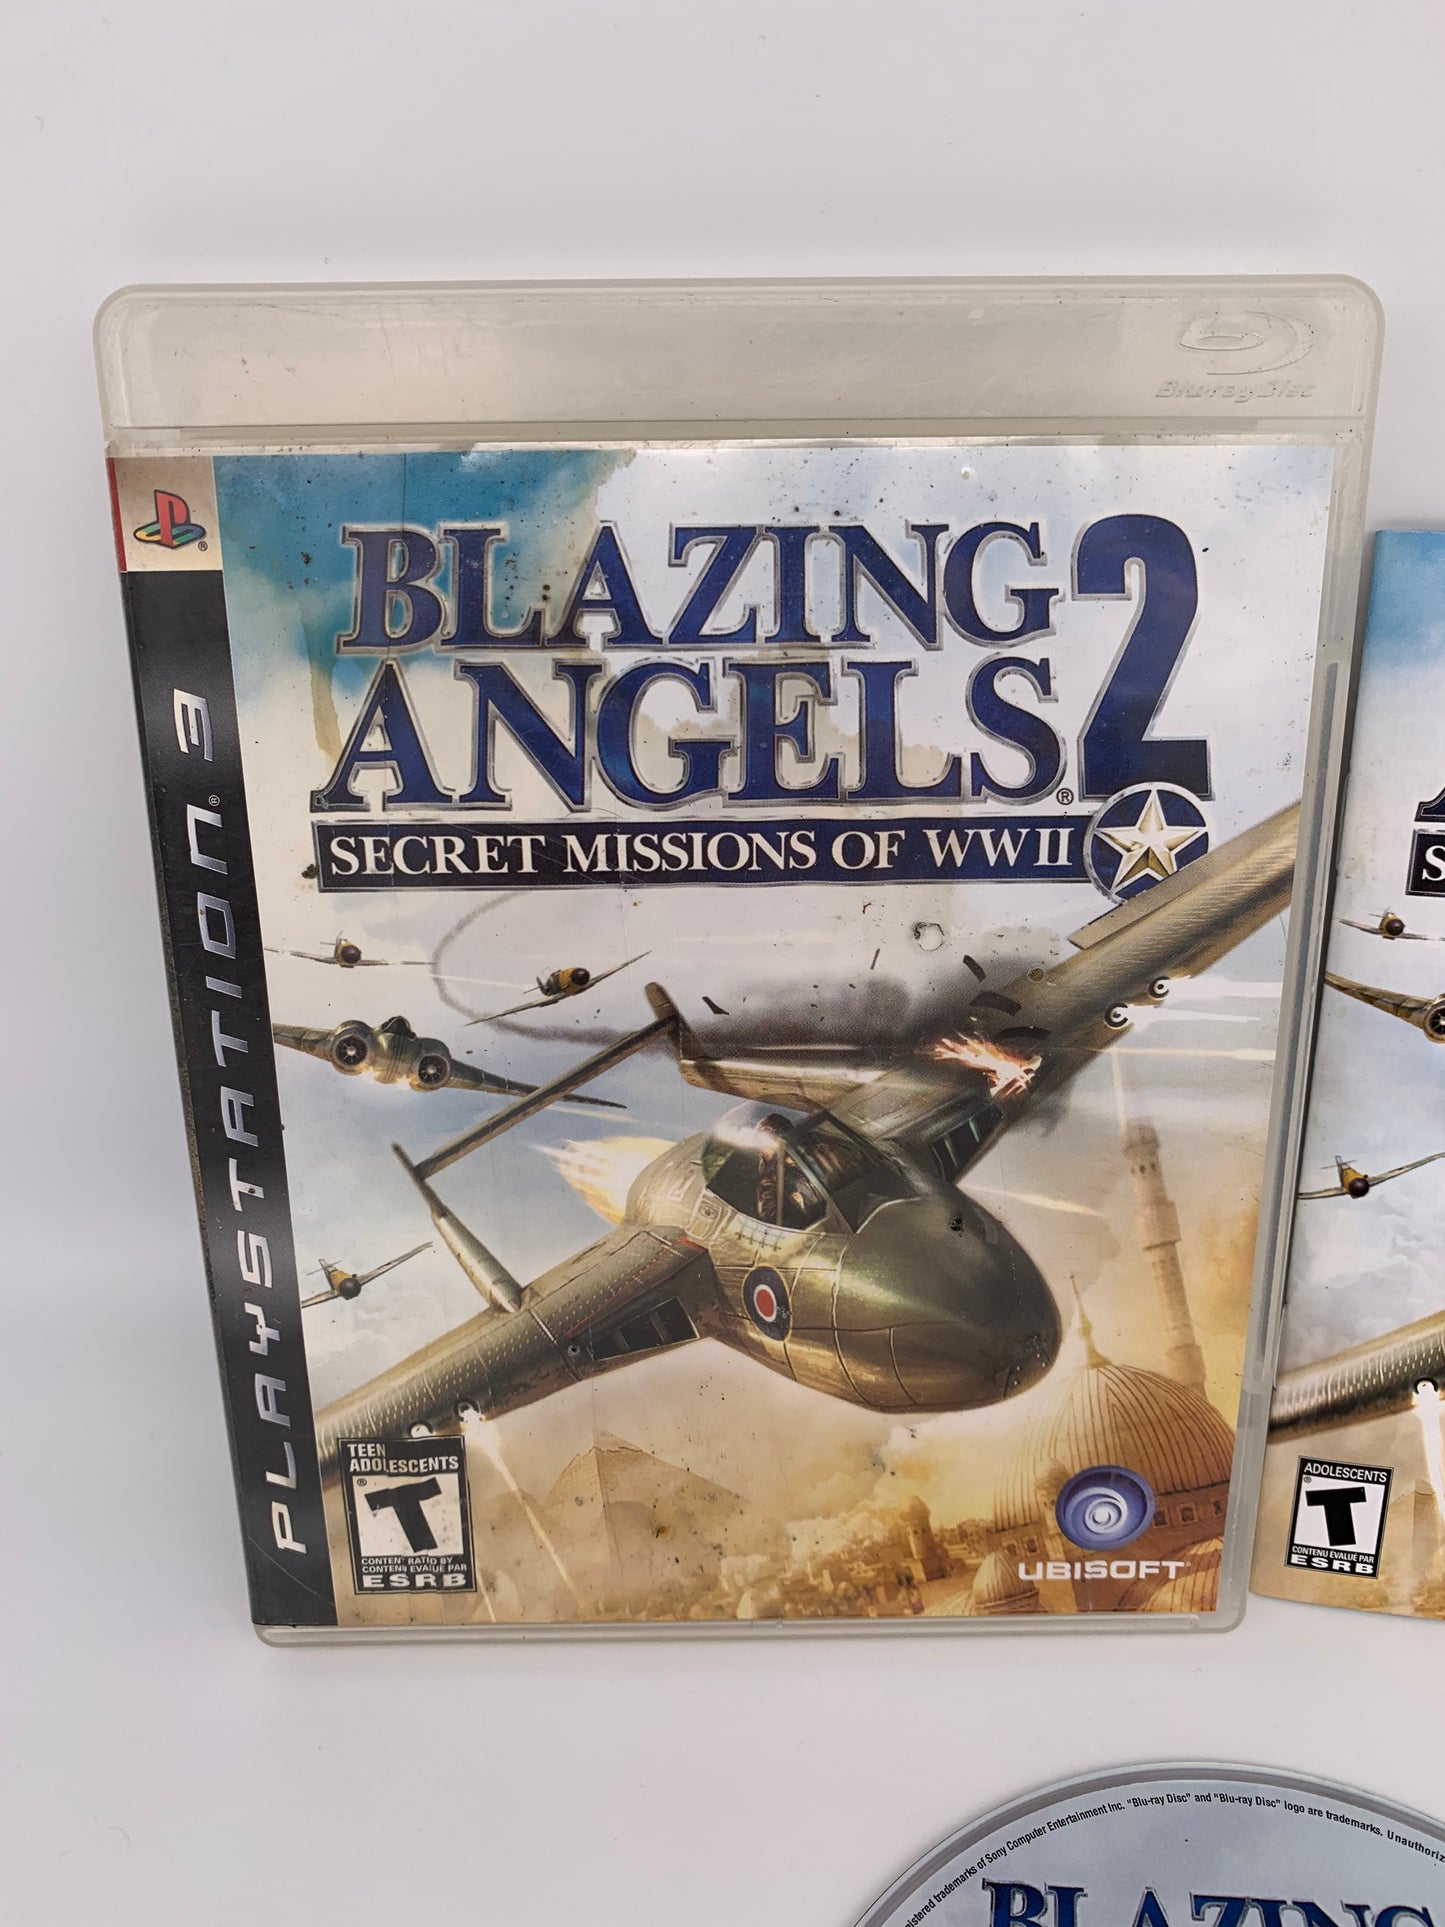 SONY PLAYSTATiON 3 [PS3] | BLAZiNG ANGELS 2 SECRET MiSSiONS OF WWII